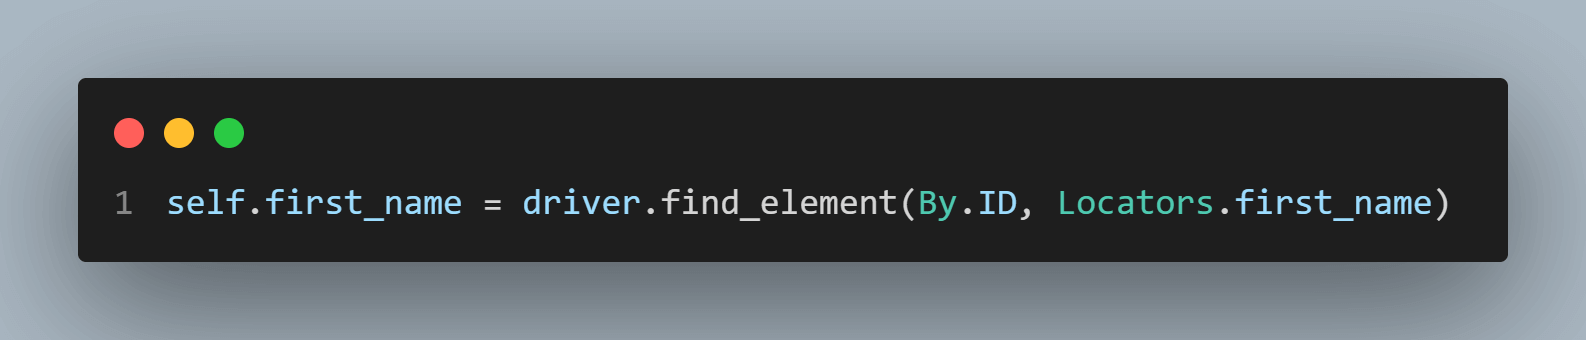 name-field-you-can-locate-using-the-element